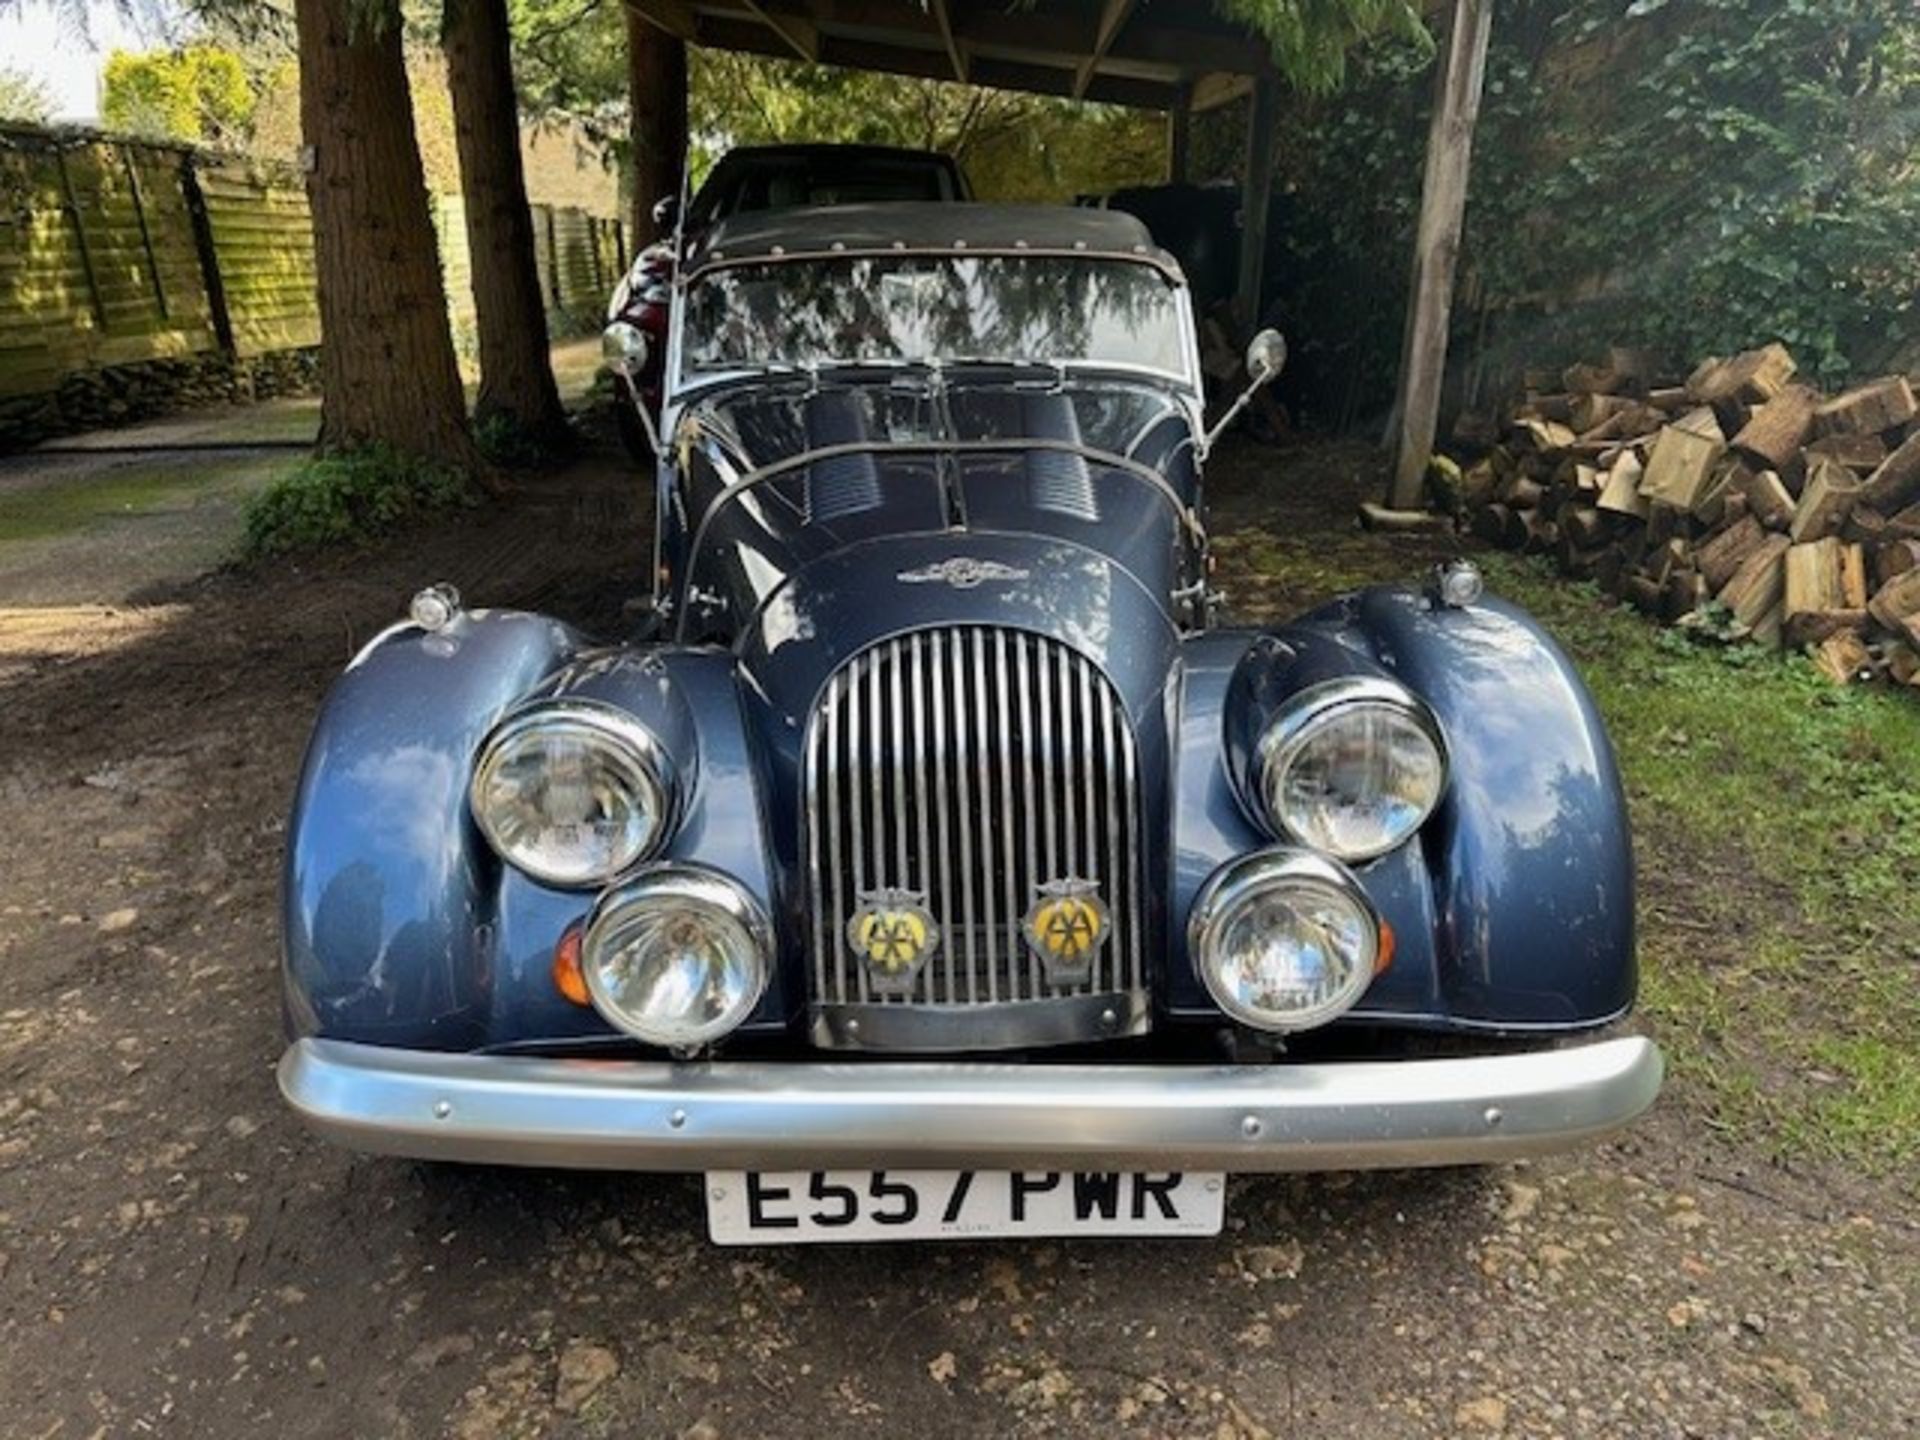 1987 Morgan 4/4 Sports Registration number E557 PWR Chassis number C7463 Engine number 87E28B- - Image 4 of 43